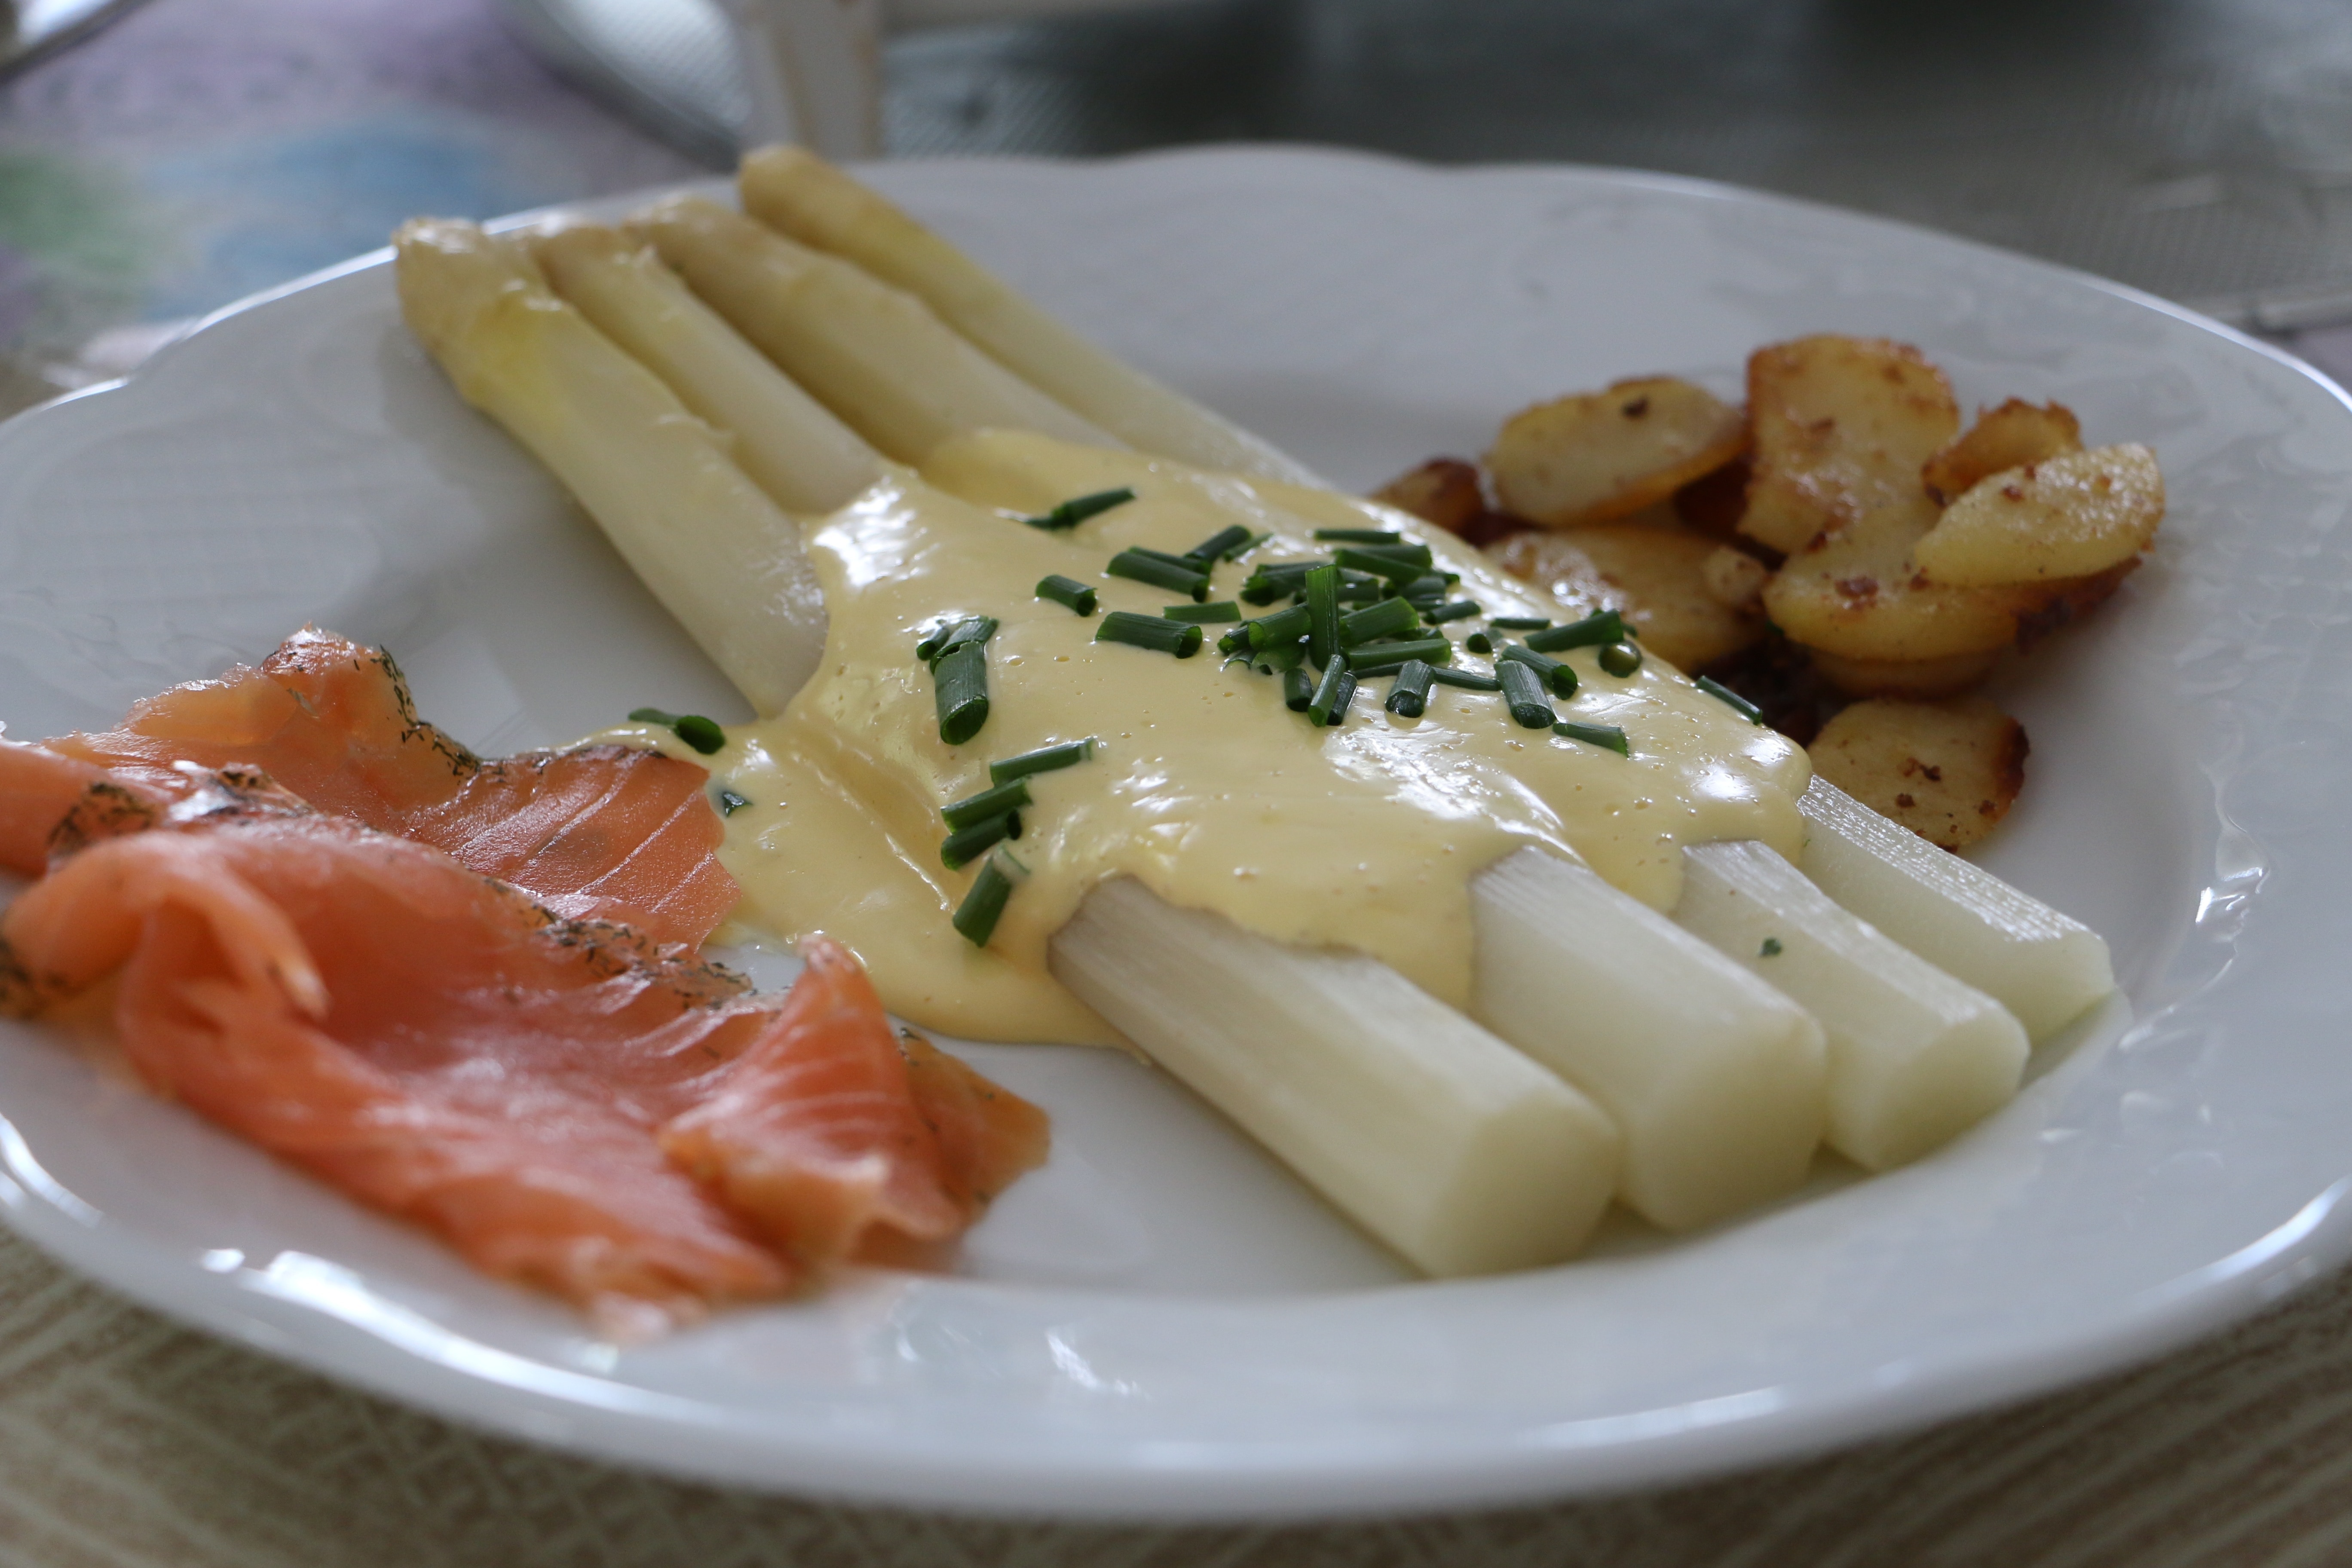 white asparagus and steamed salmon with sauteed garlic dish